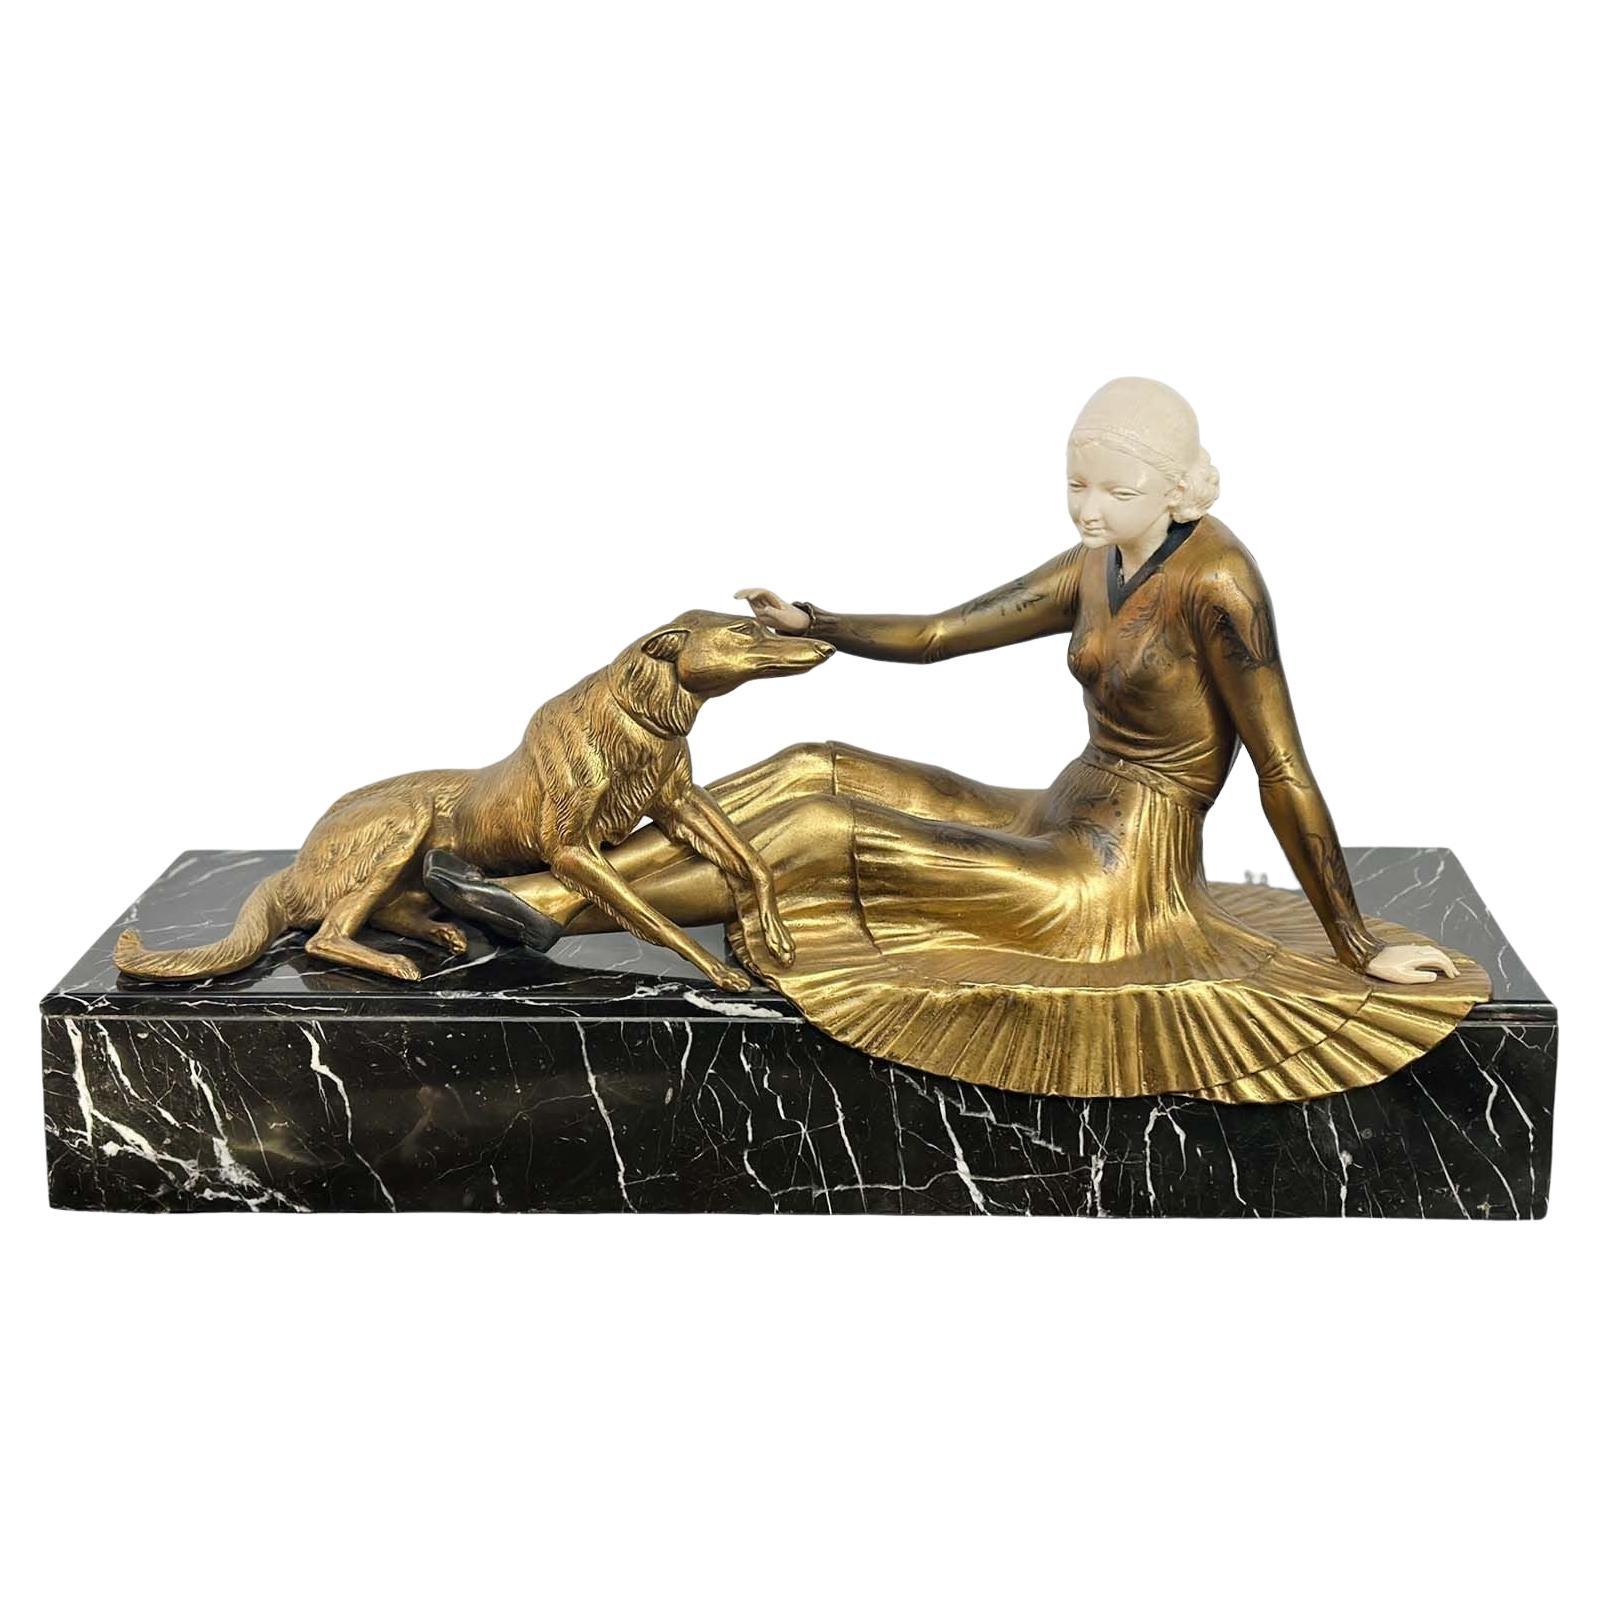 Art Deco Bronze Patina & Marble Sculpture of Women & Dog by Cham, c.1920's